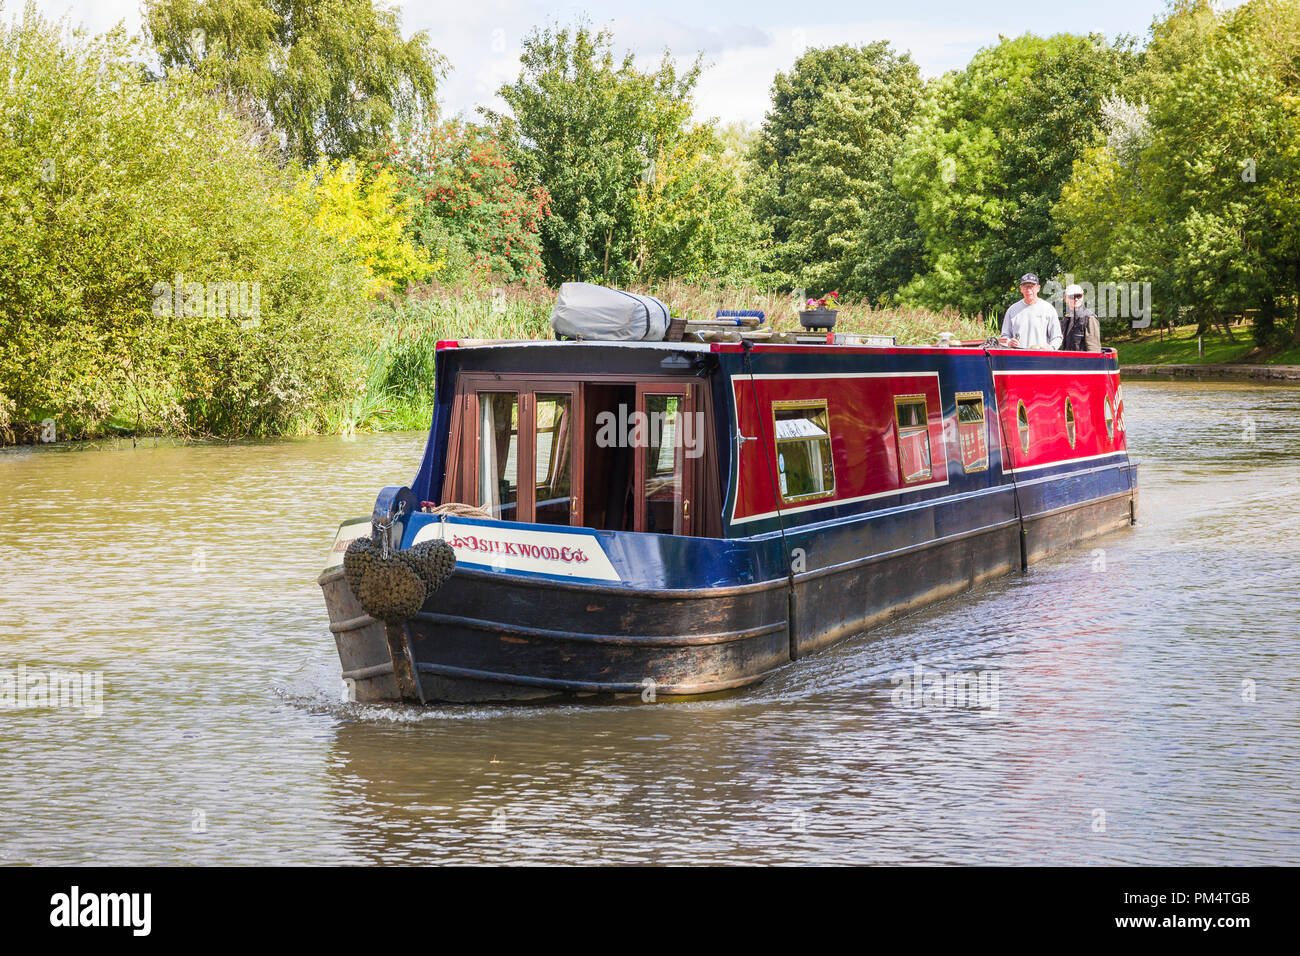 SILKWOOD a narrow boat cruising on the Trent & Mersey canal on a spur to the lift to lower water in Cheshire England UK Stock Photo